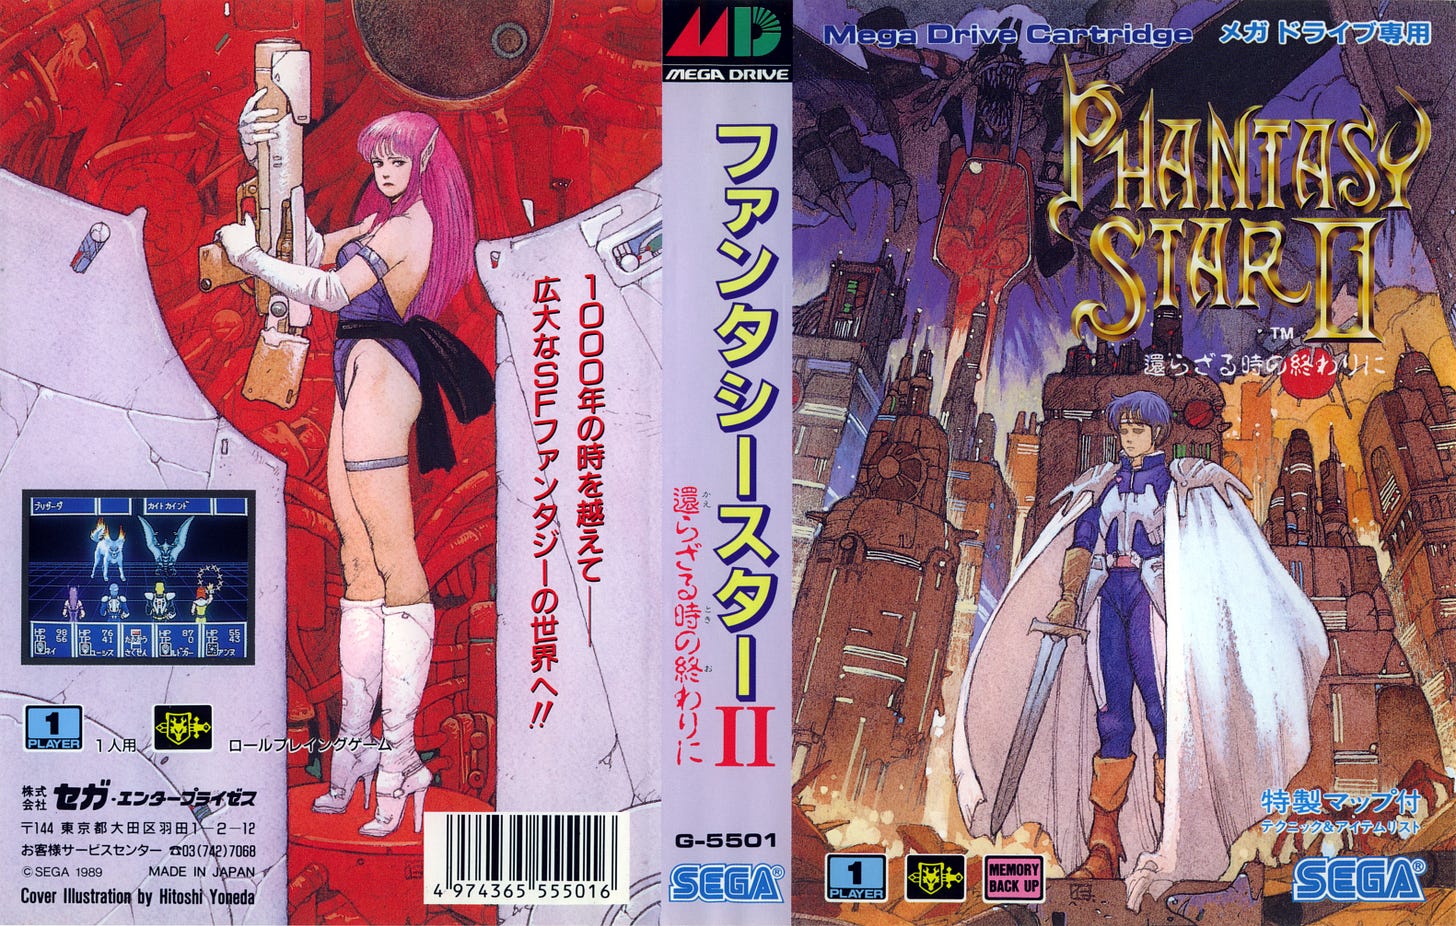 The back and front box art of Phantasy Star II, featuring Nei on the back as well as a screenshot of combat, and on the front, protagonist Rolf, in his cape and wielding a sword.